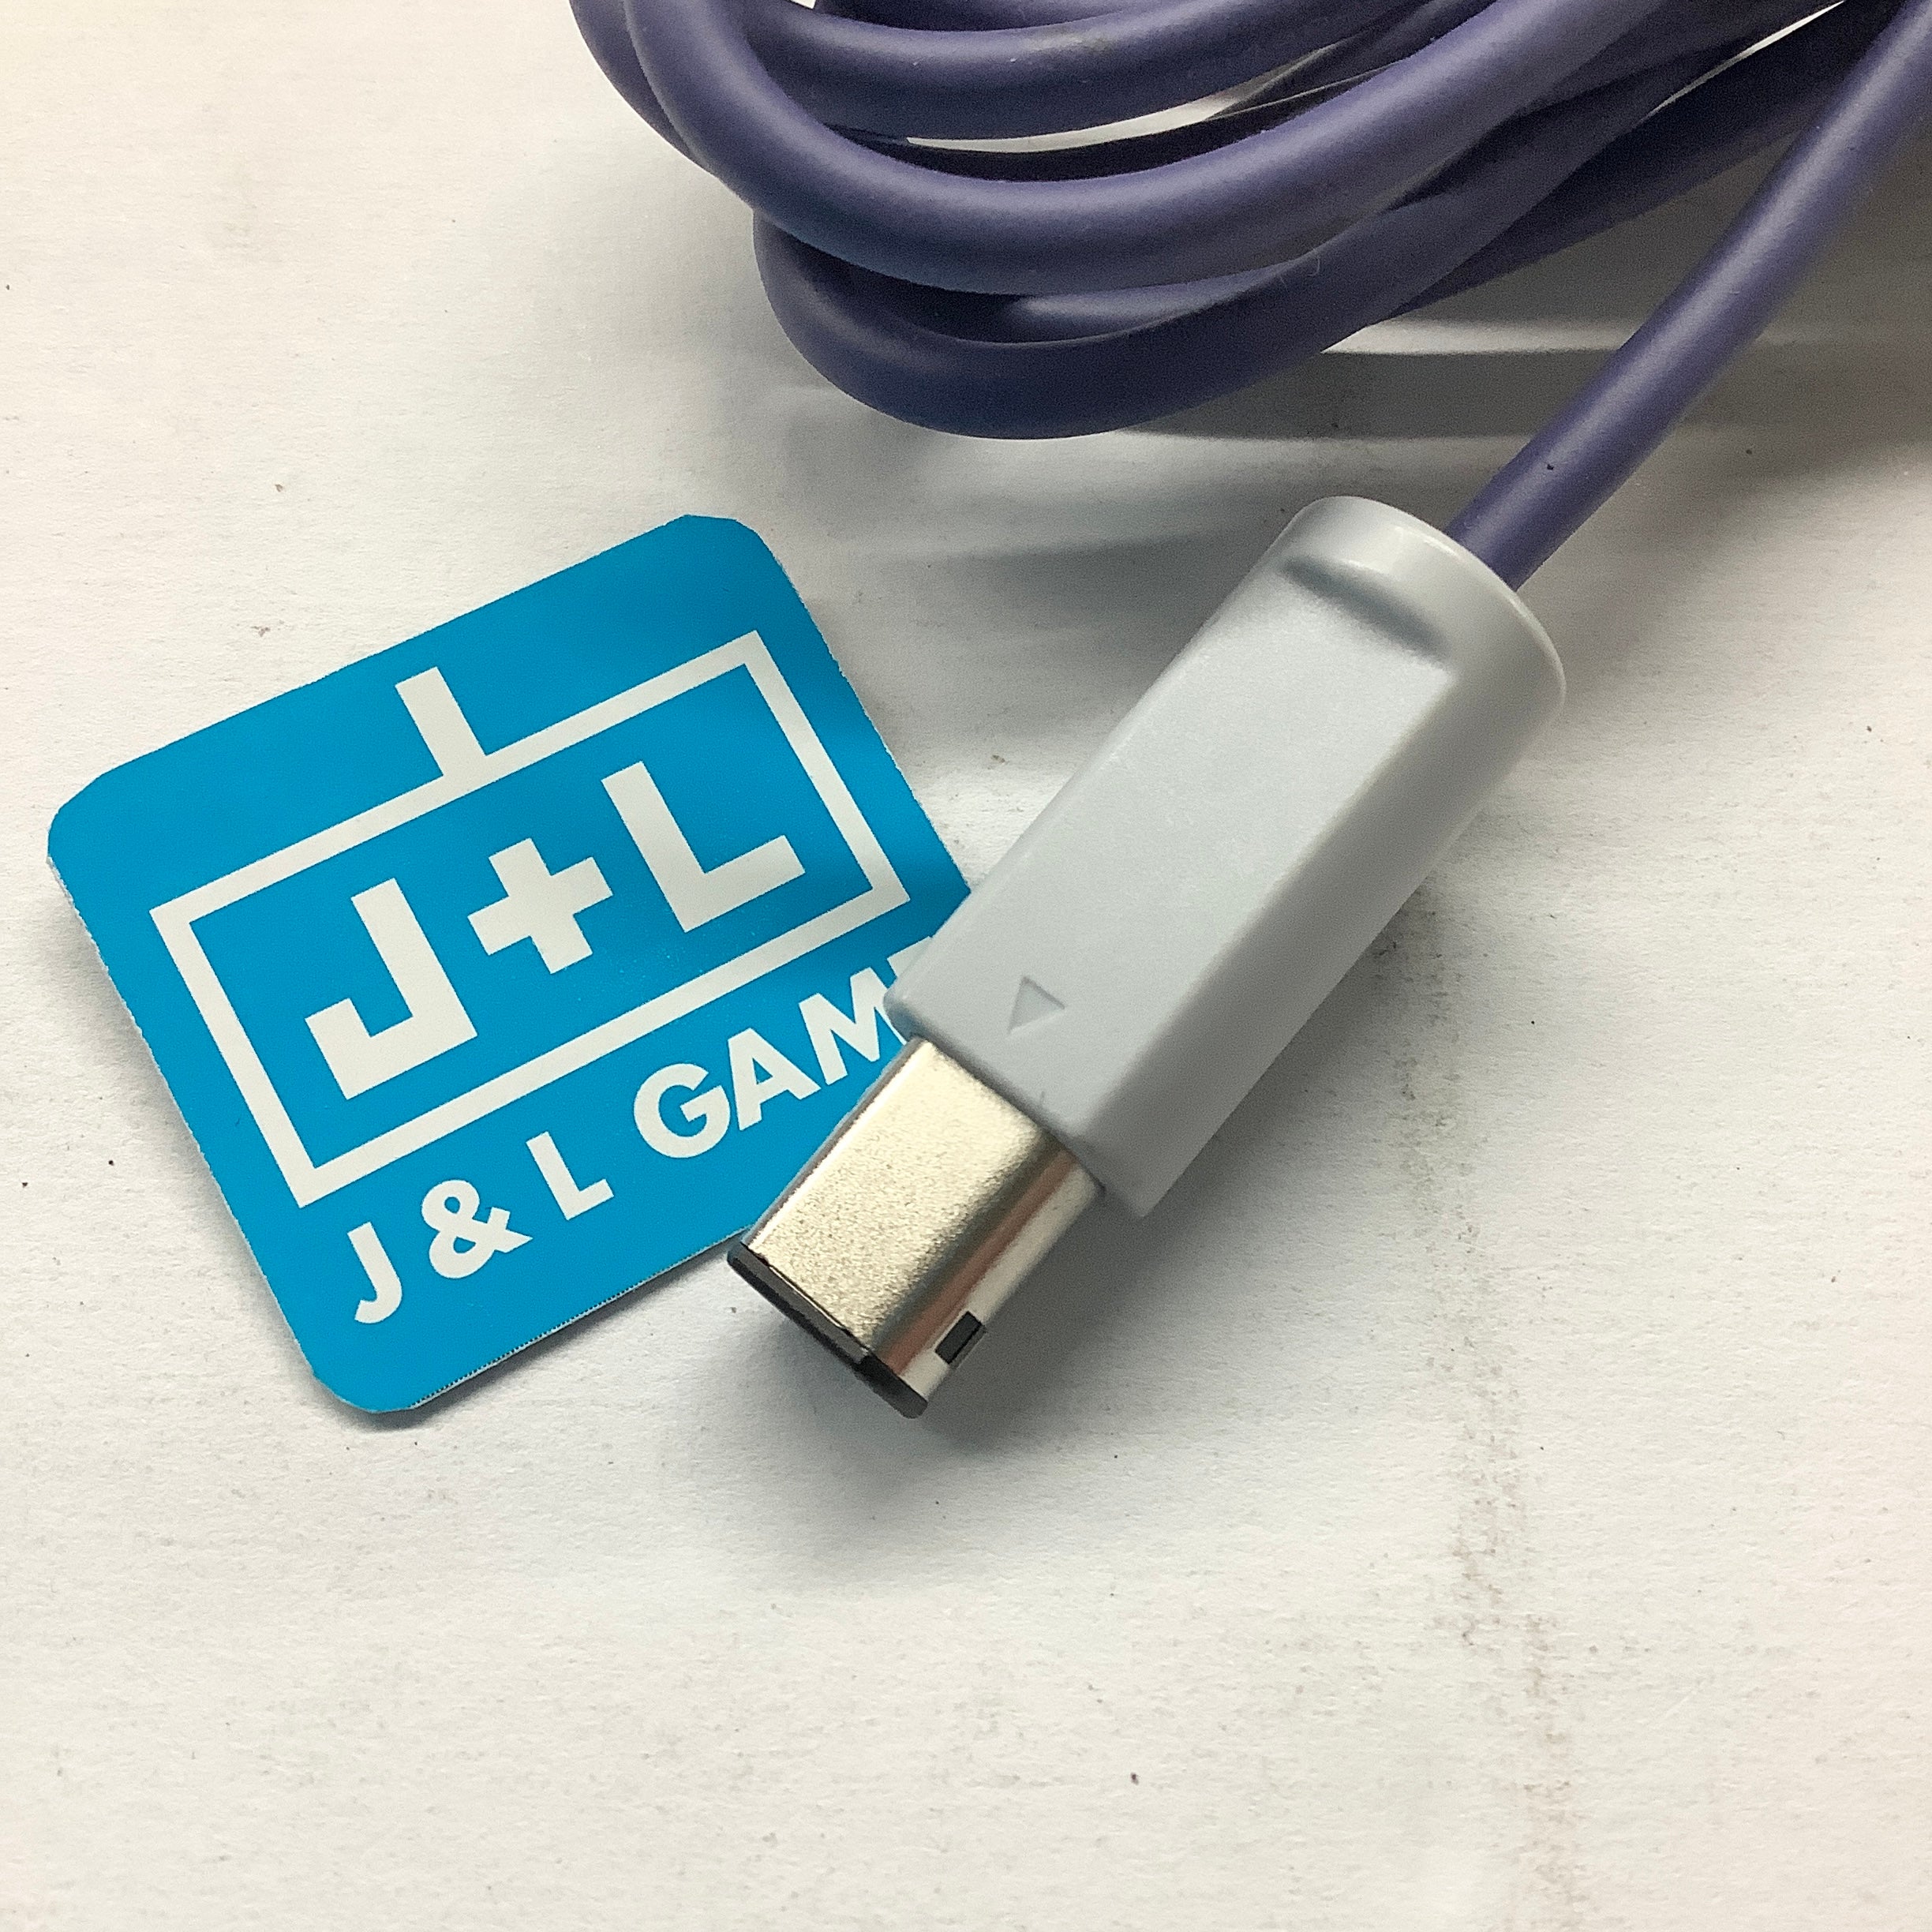 Nintendo GameCube Link Cable - (GBA) Game Boy Advance - (GC) GameCube [Pre-Owned] Accessories Nintendo   